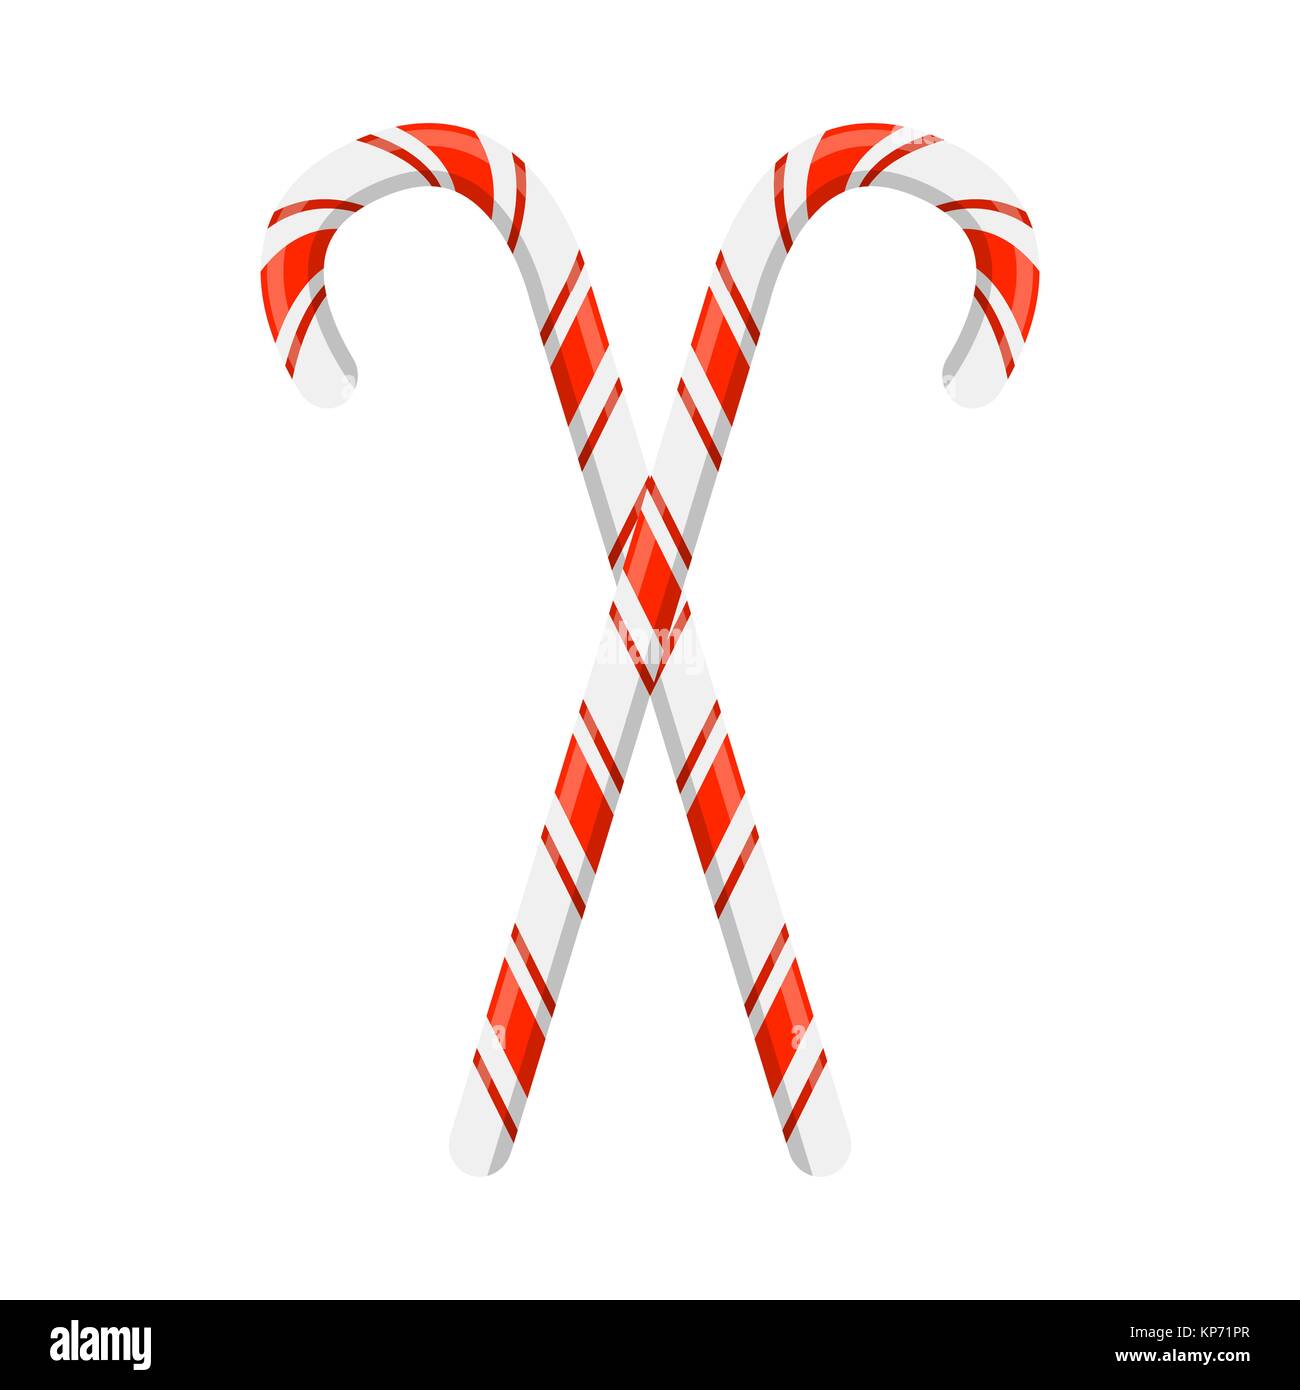 https://c8.alamy.com/comp/KP71PR/candy-cane-pair-for-christmas-design-isolated-on-white-background-KP71PR.jpg